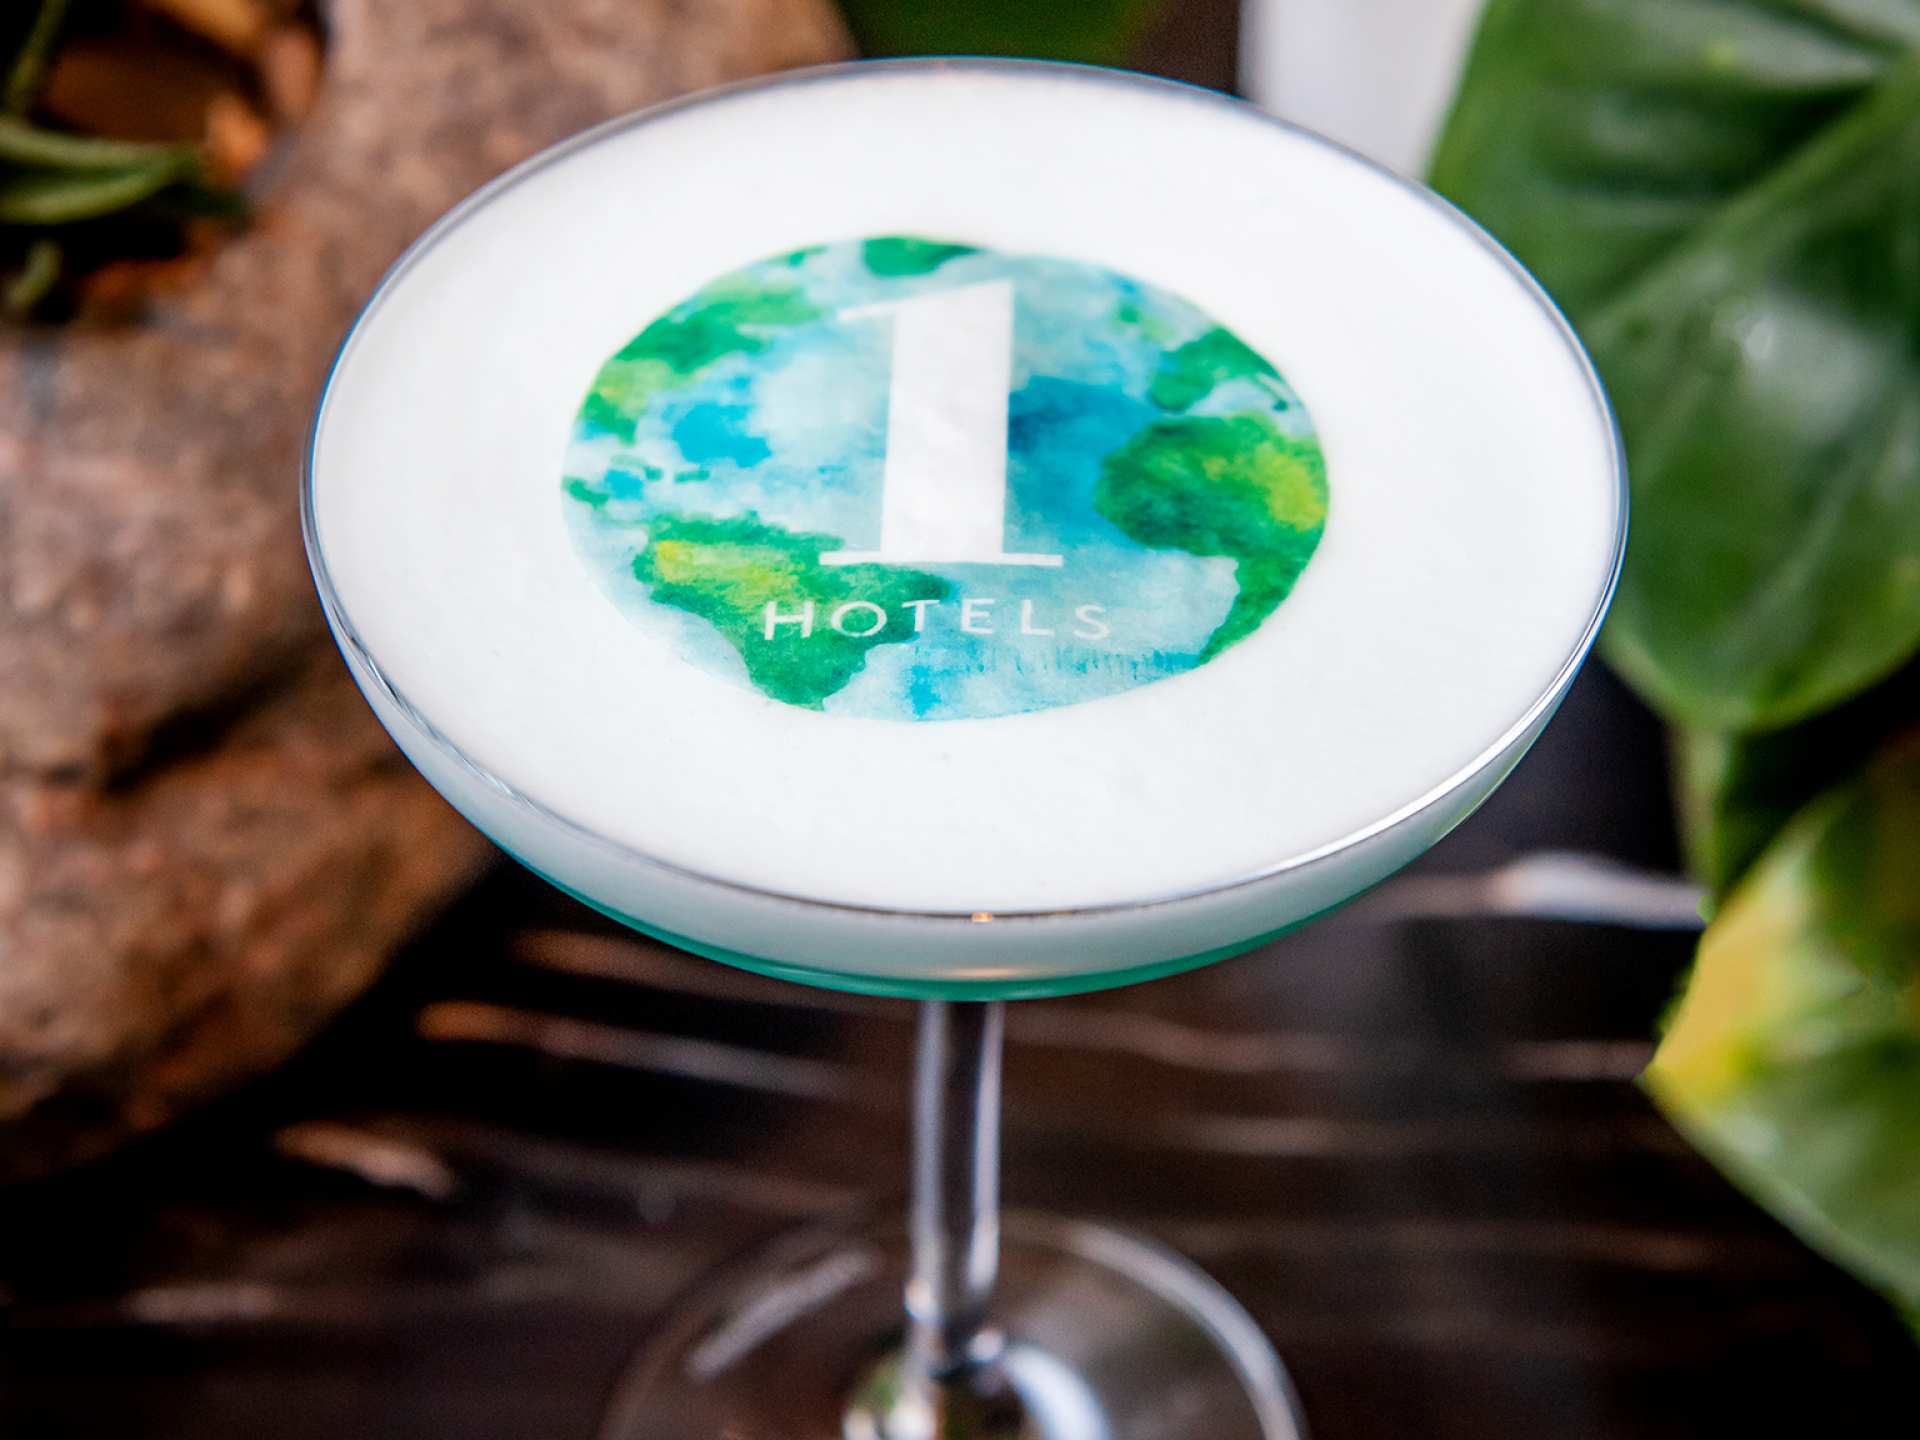 Things to do in Toronto | The Sapphire Tides cocktail at 1 Hotel Toronto